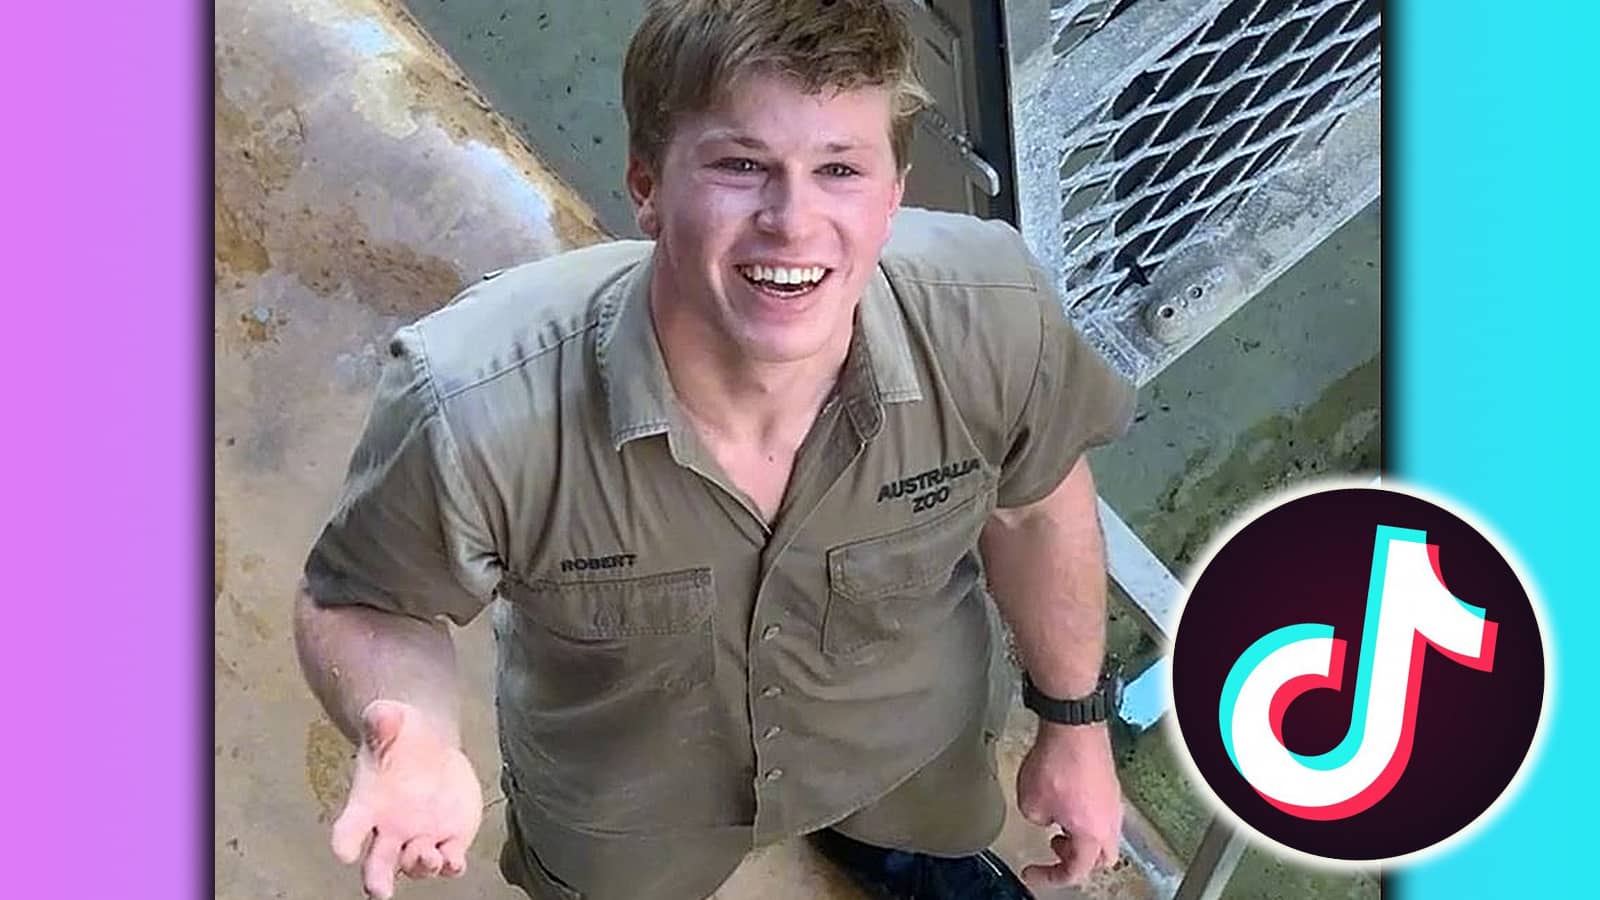 Woman goes viral for asking out Robert Irwin